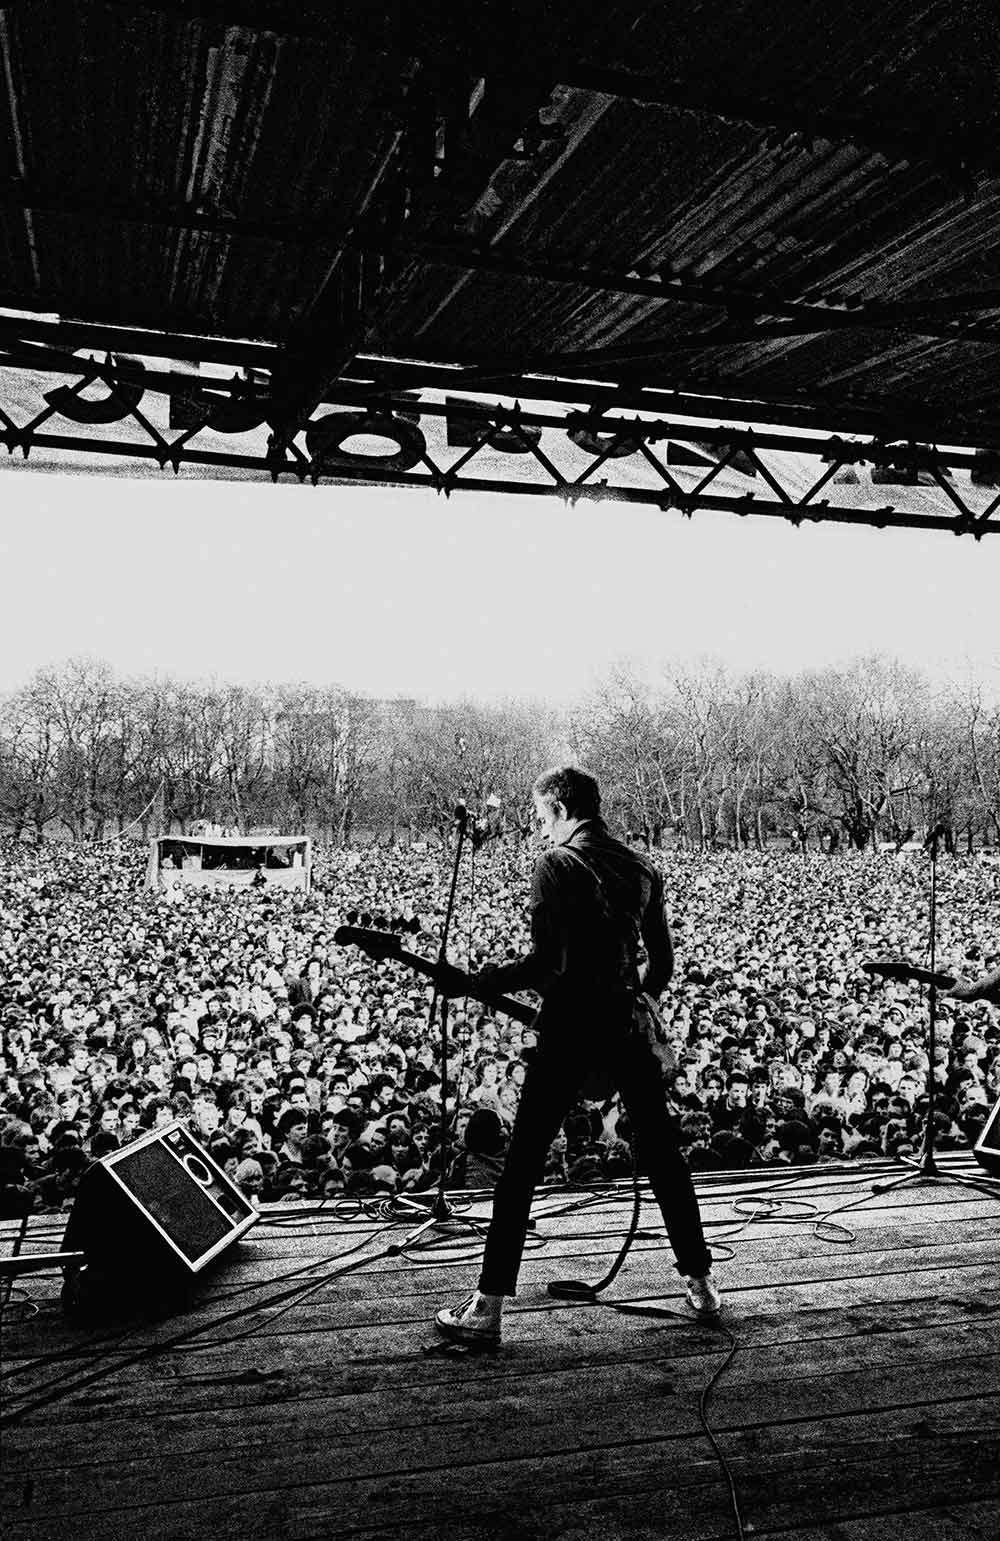 Paul Simonon, on stage at Rock Against Racism in Victoria Park, 1978.